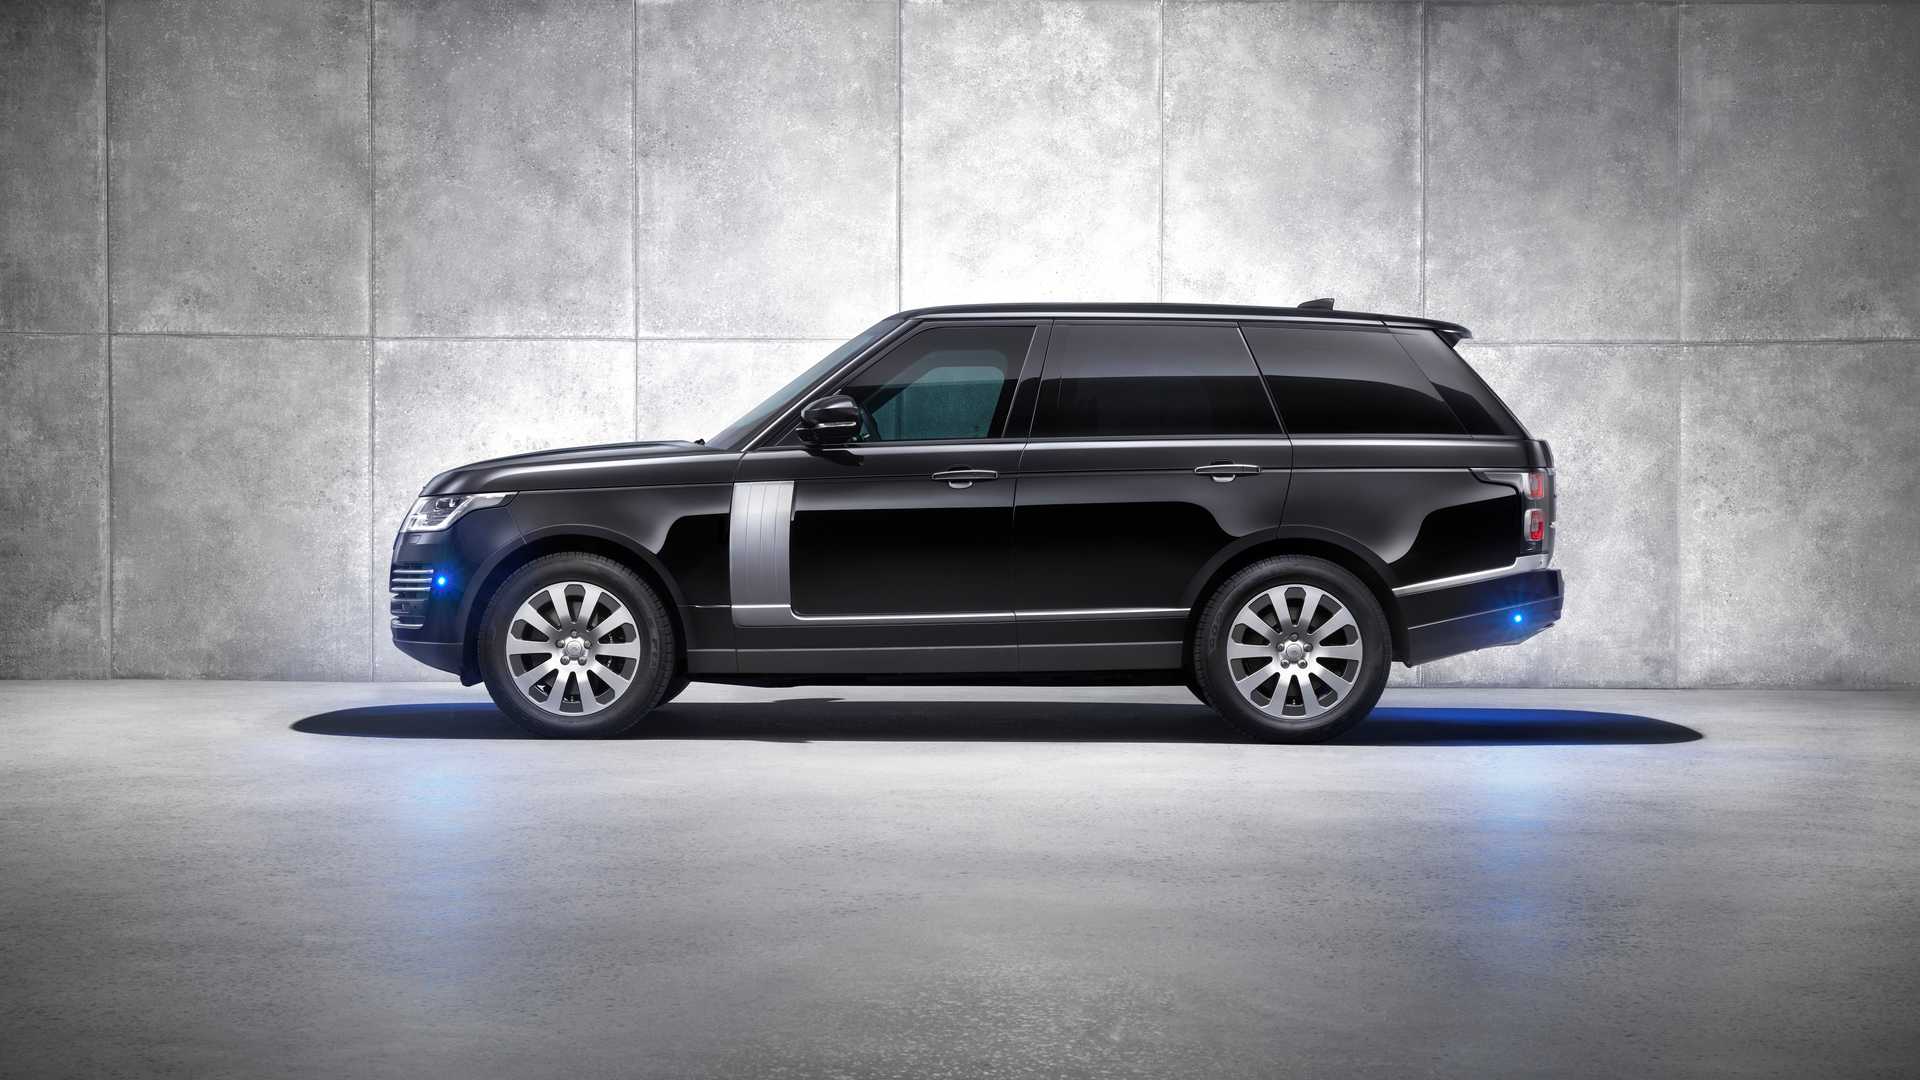 Range Rover Sentinel Is A Mobile Fortress Now With More Power